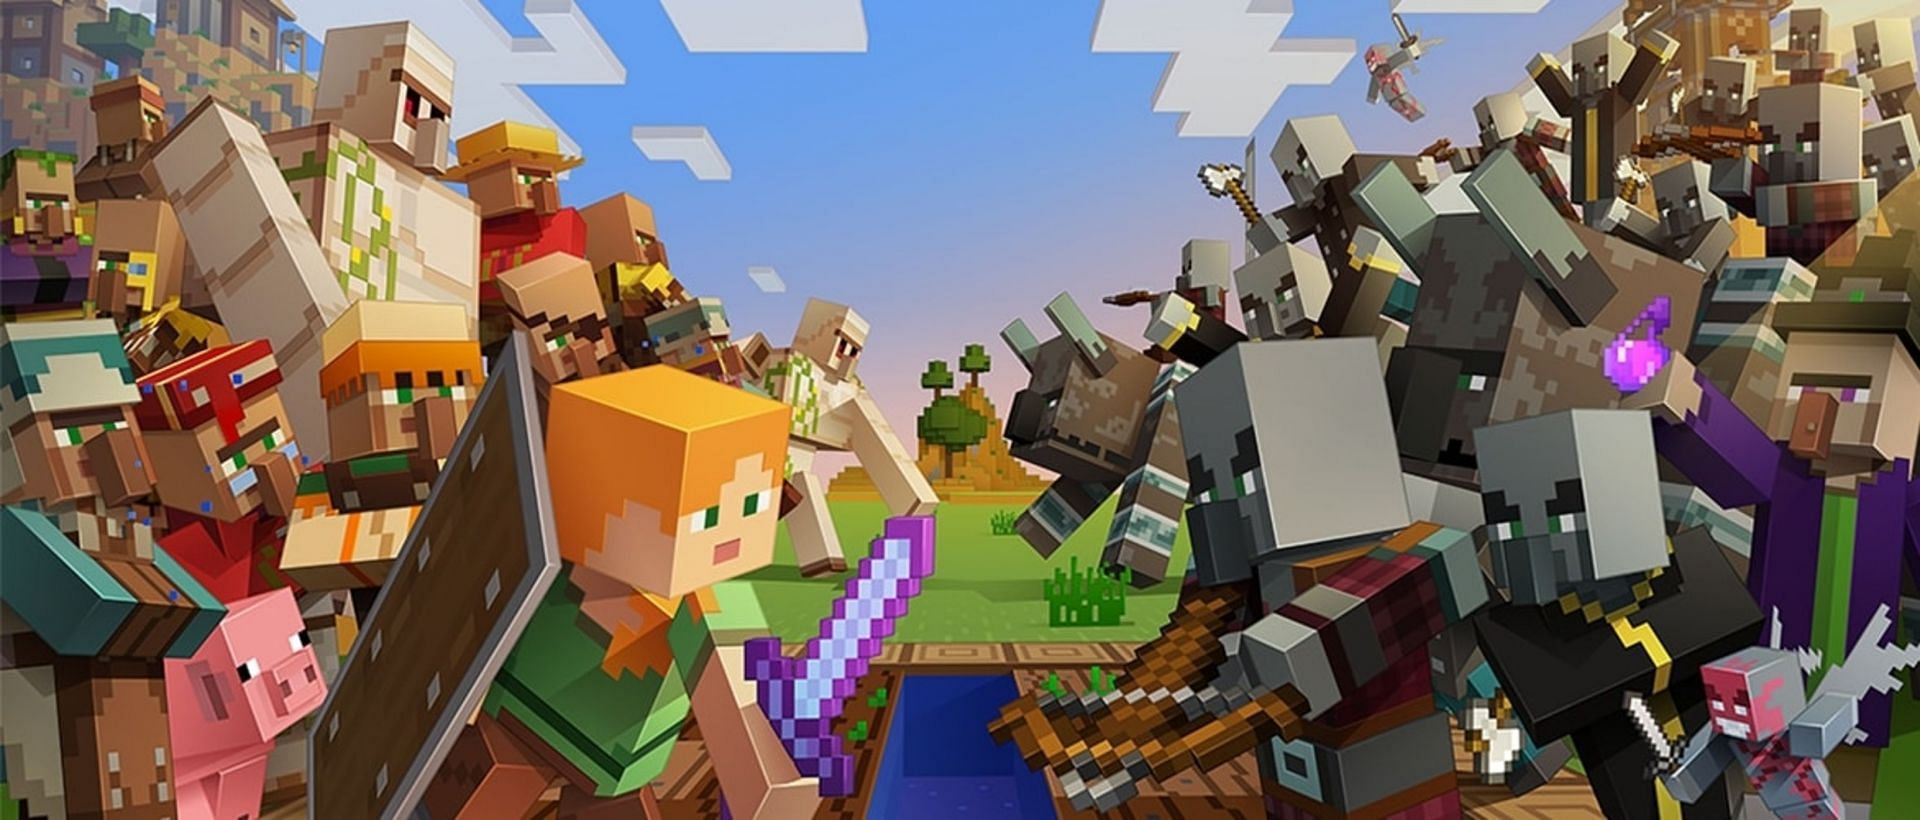 The official art for Village and Pillage (Image via Mojang)